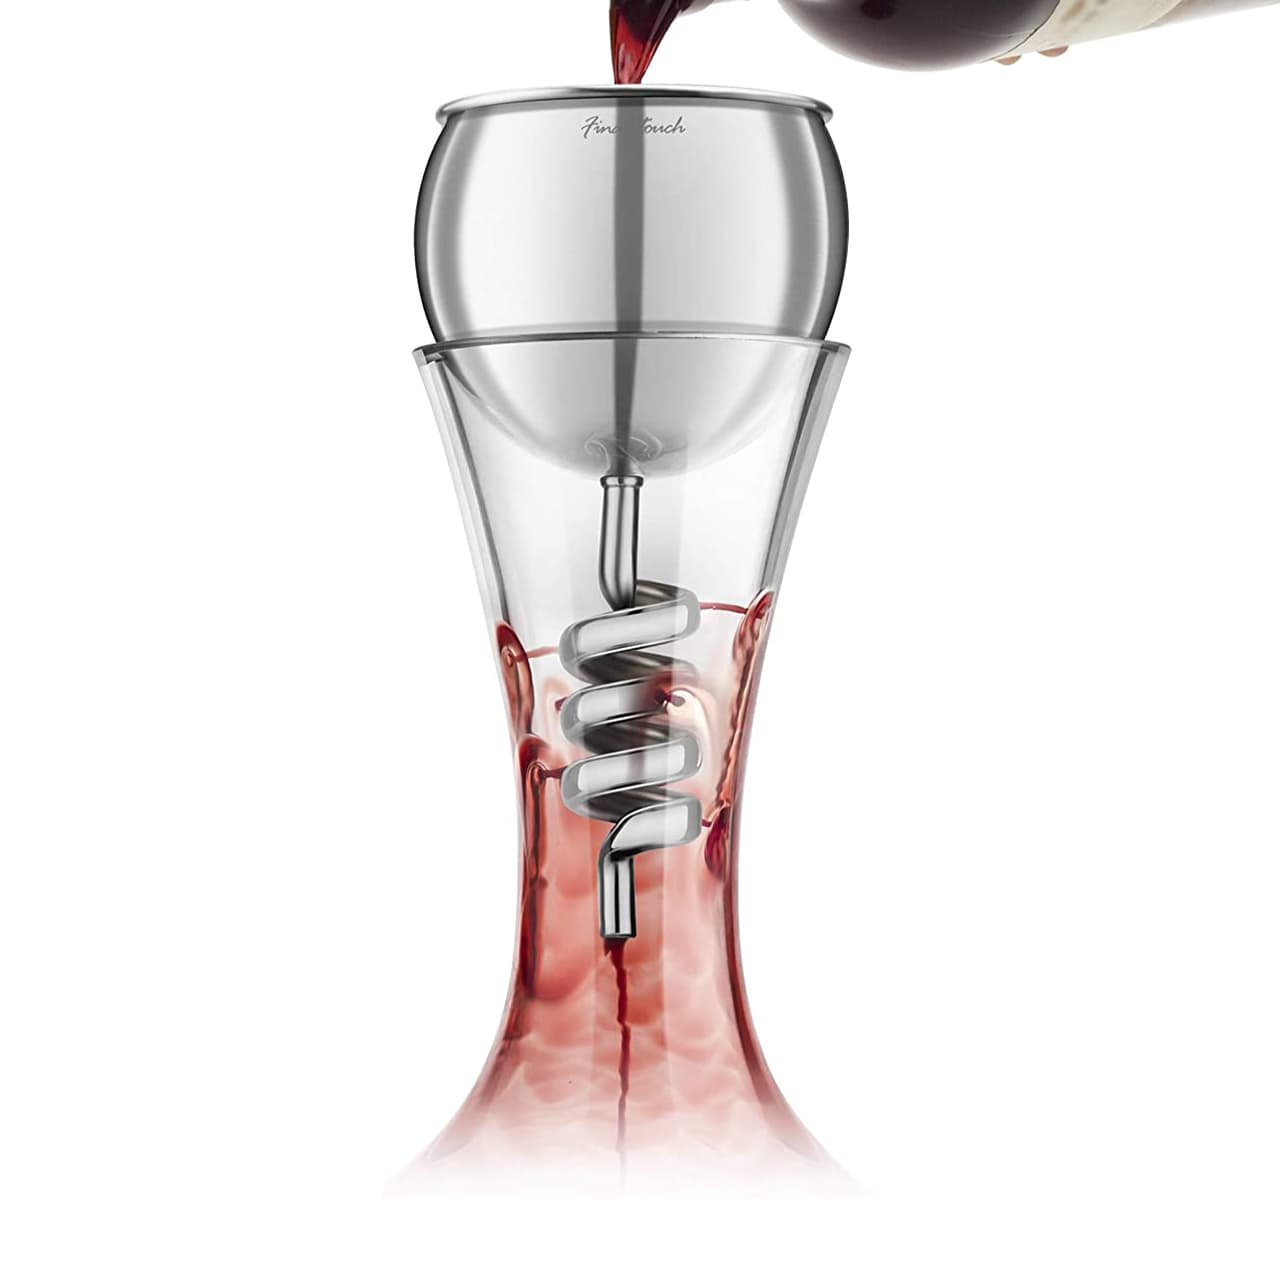 Final Touch Steel Twister Aerator for Decanters